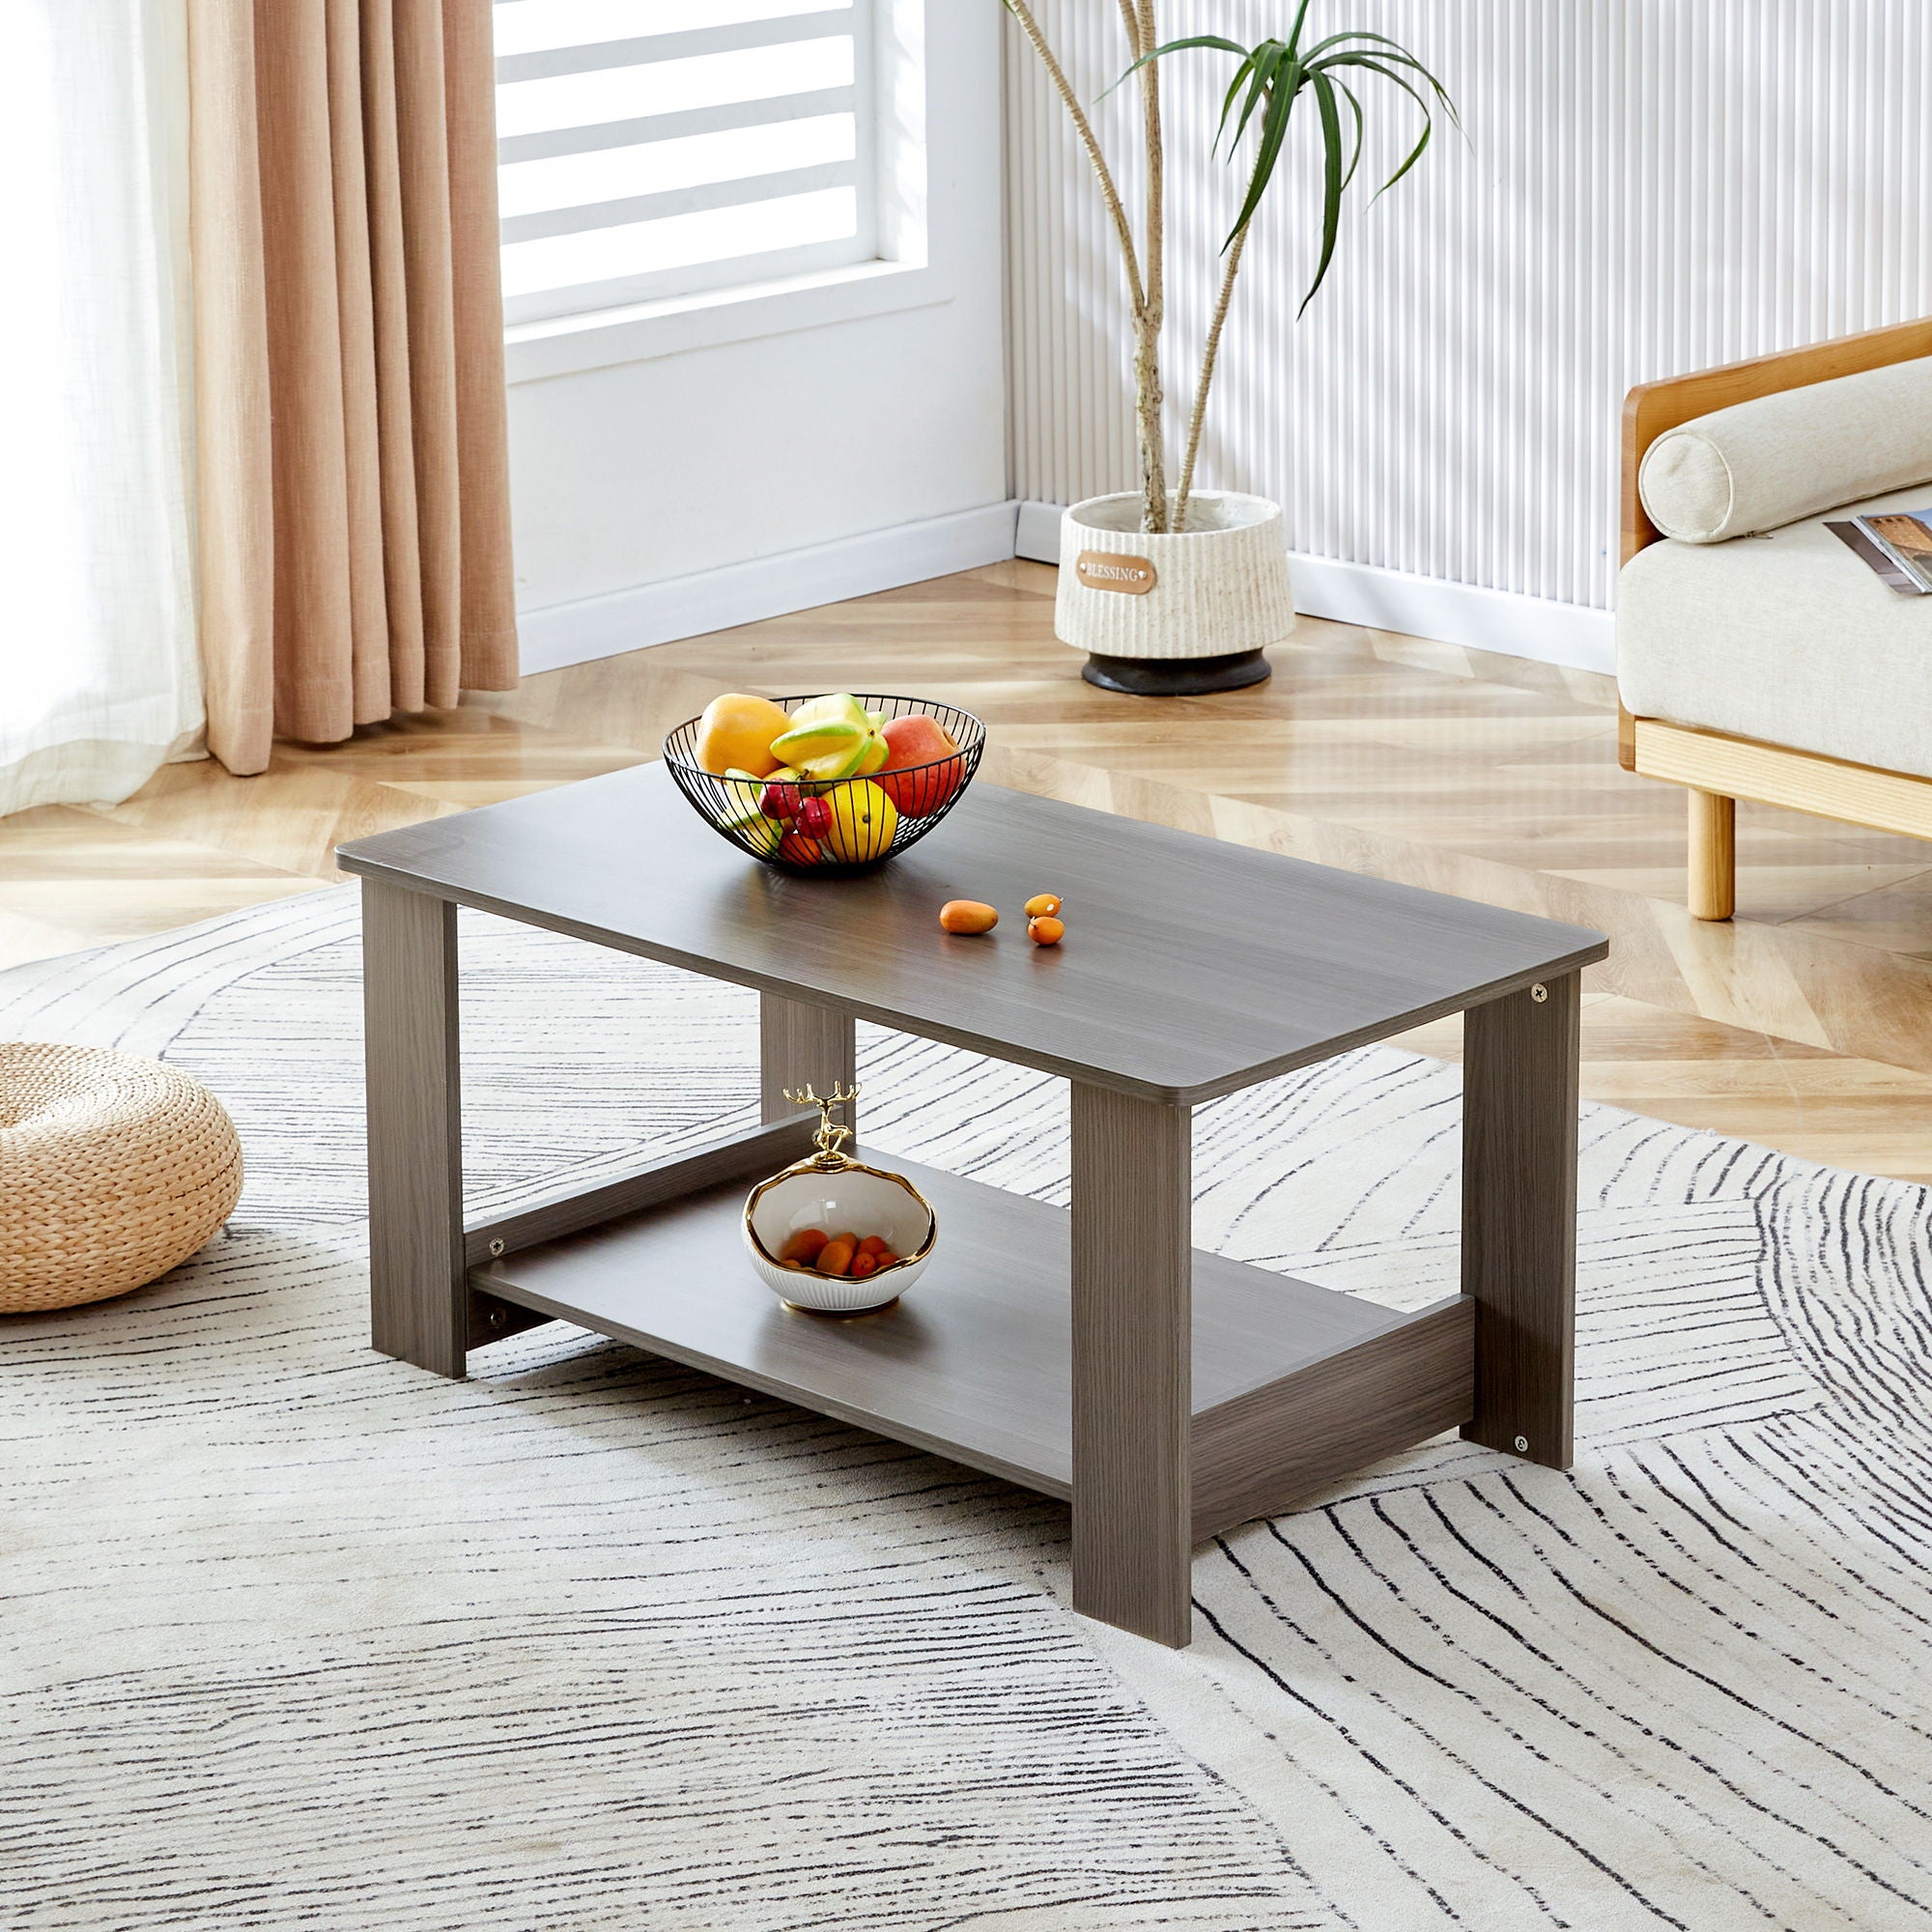 Modern Minimalist Gray Wood Grain Double Layered Rectangular Coffee Table, Tea Table.Mdf Material Is More Durable, Suitable For Living Room, Bedroom, And Study Room